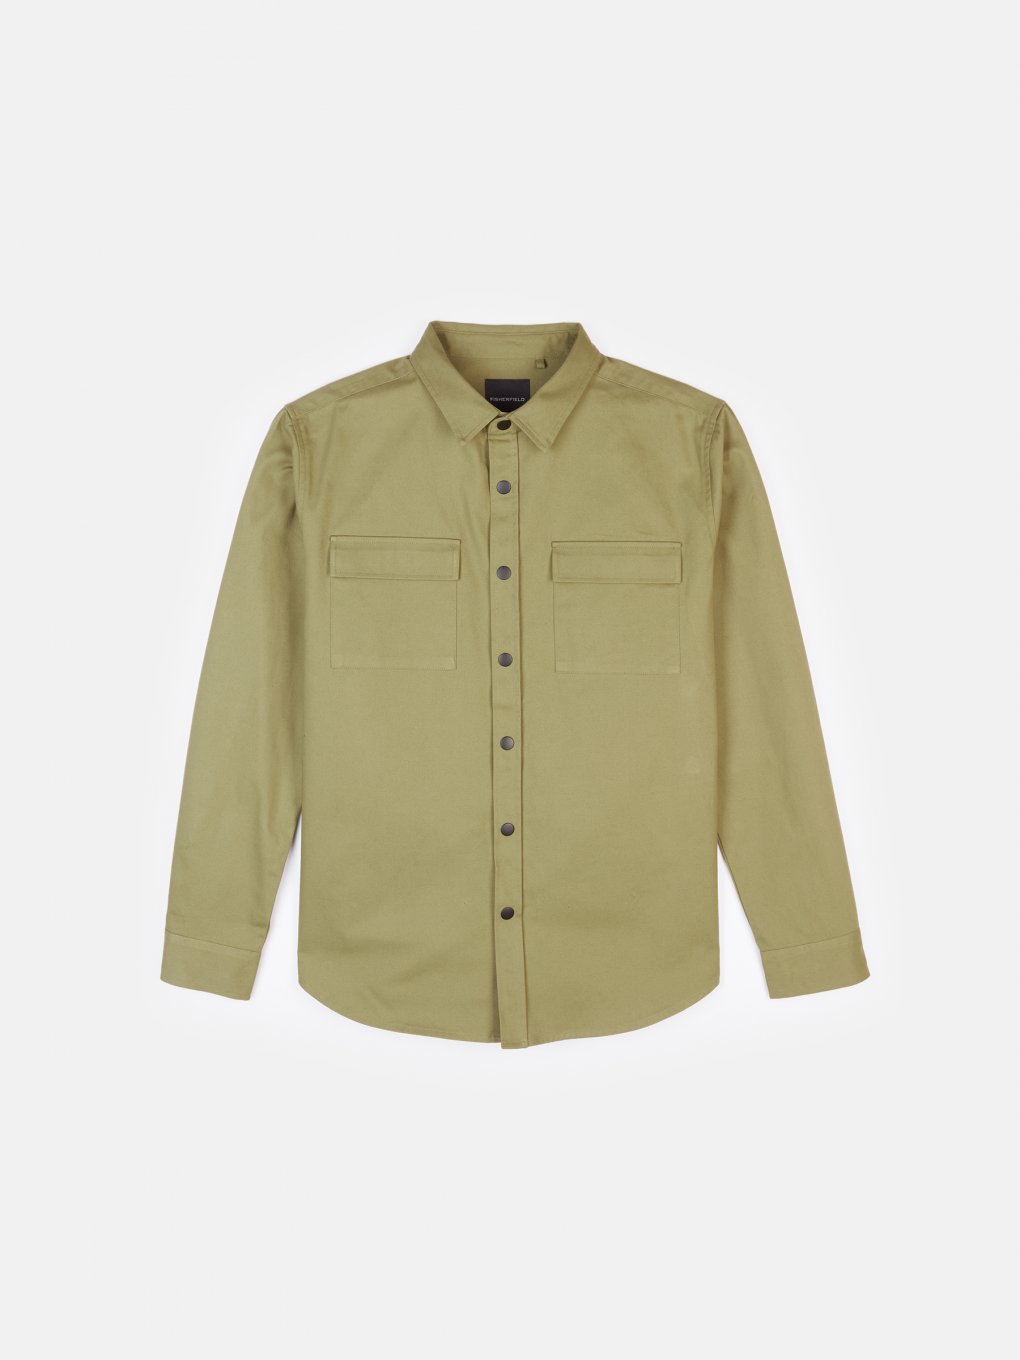 Cotton overshirt with snap buttons